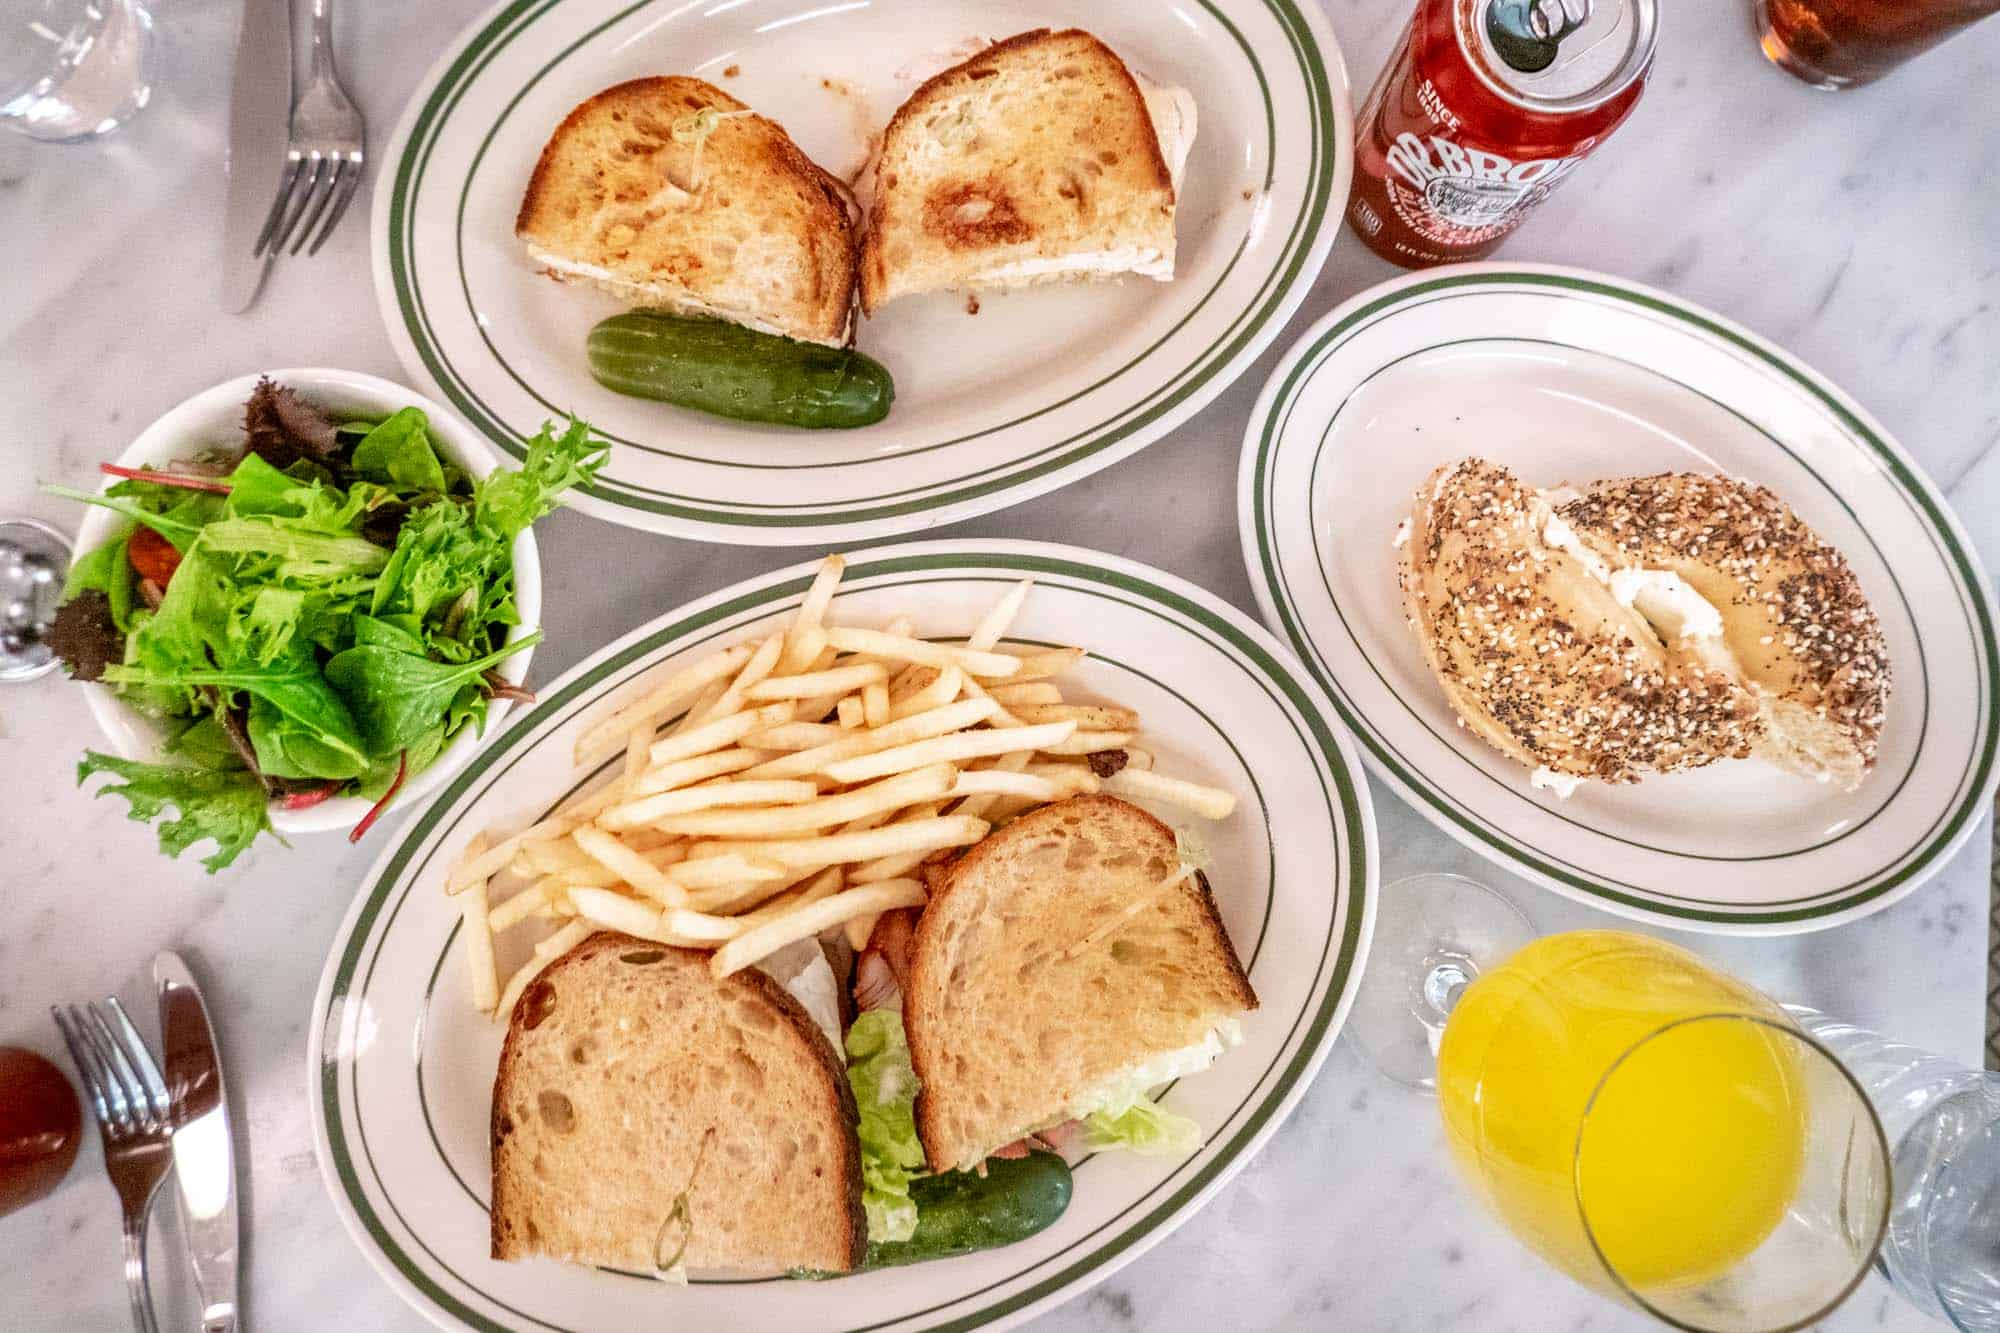 Sandwiches on a restaurant table with a salad, French fries, and a bagel